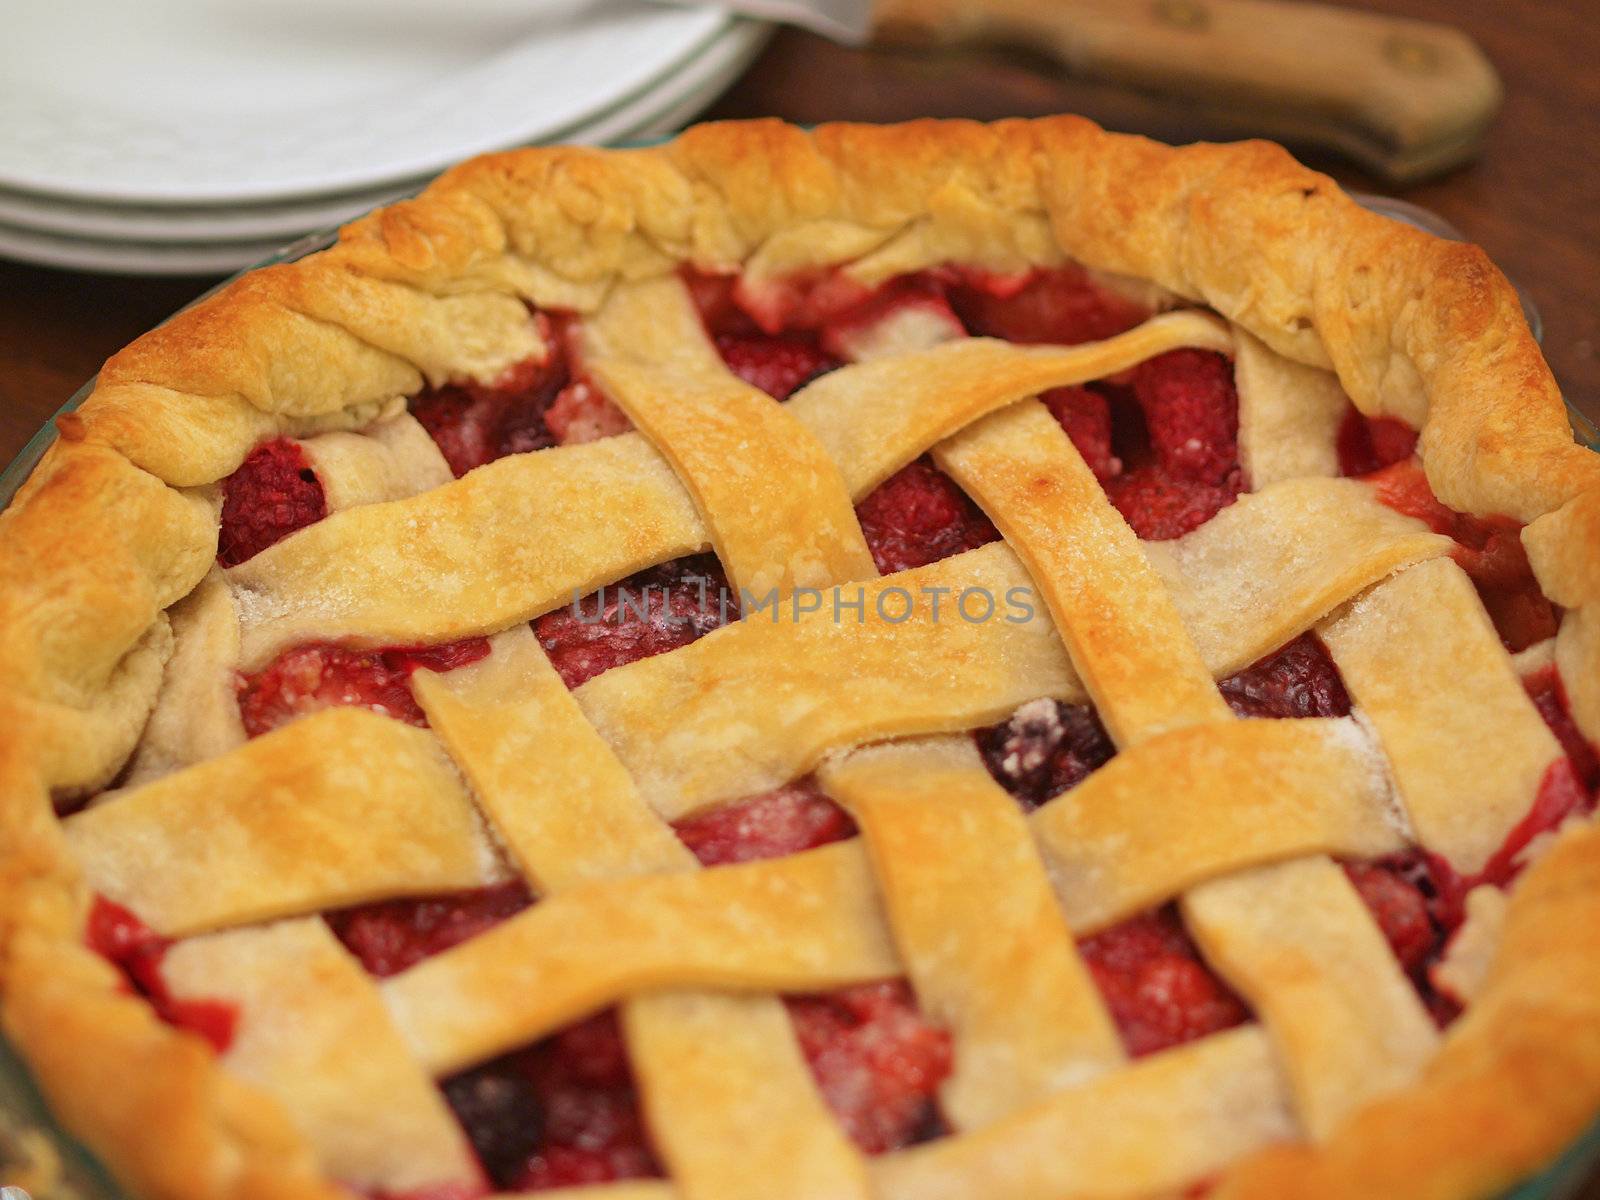 Fresh Baked Three-Berry Pie with Lattice Crust with Plates and Knife